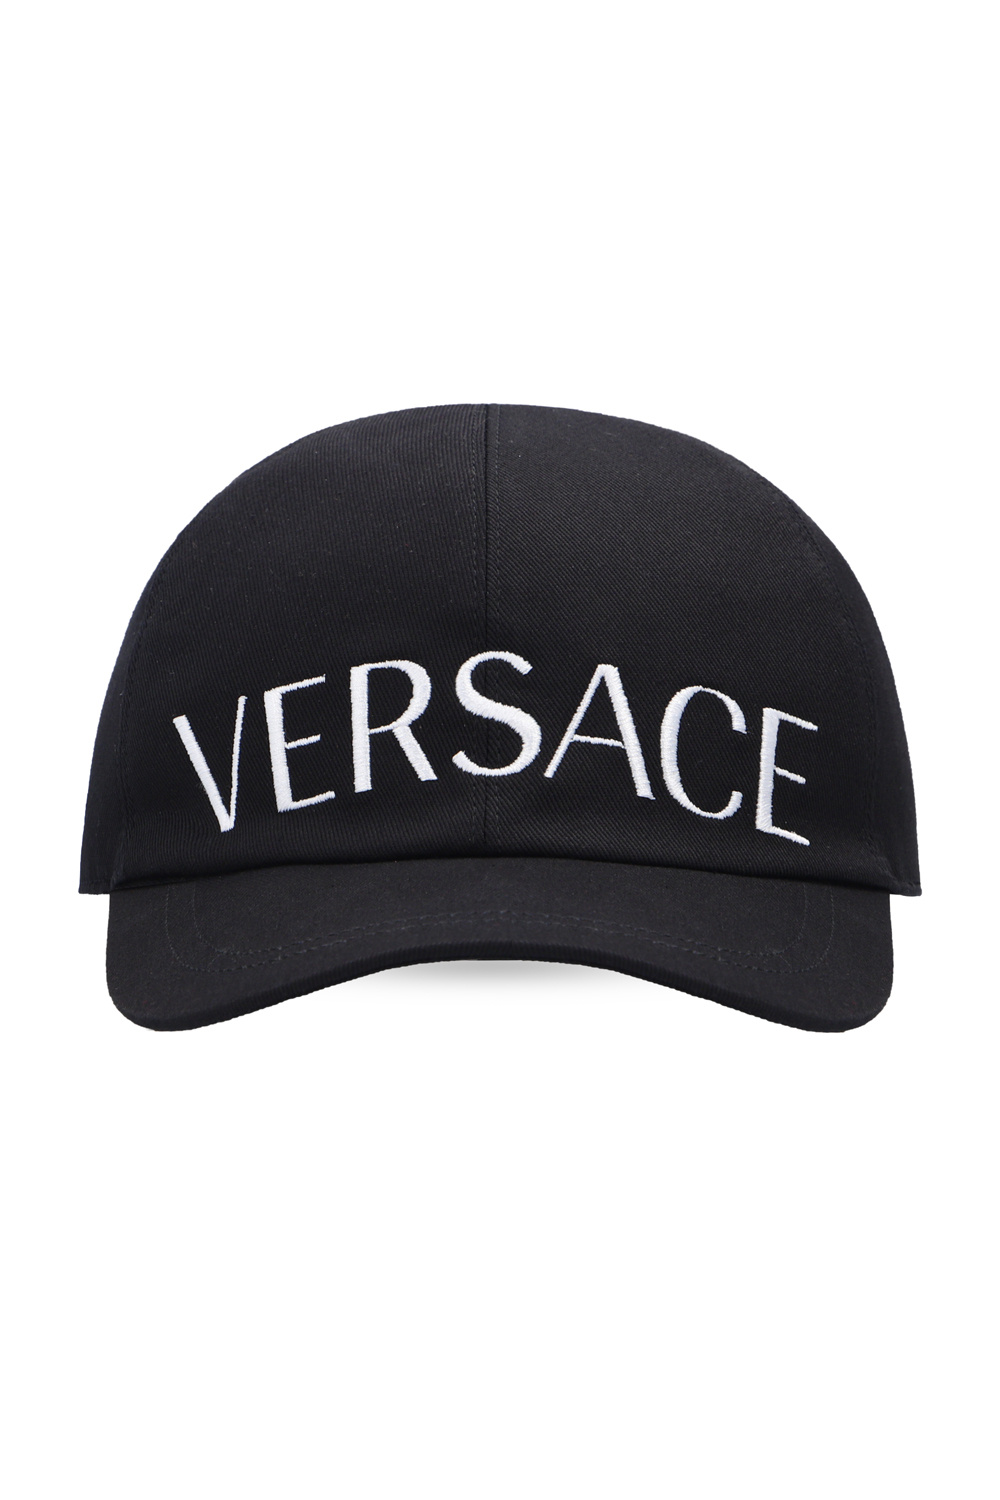 Versace Kids polo-shirts caps accessories